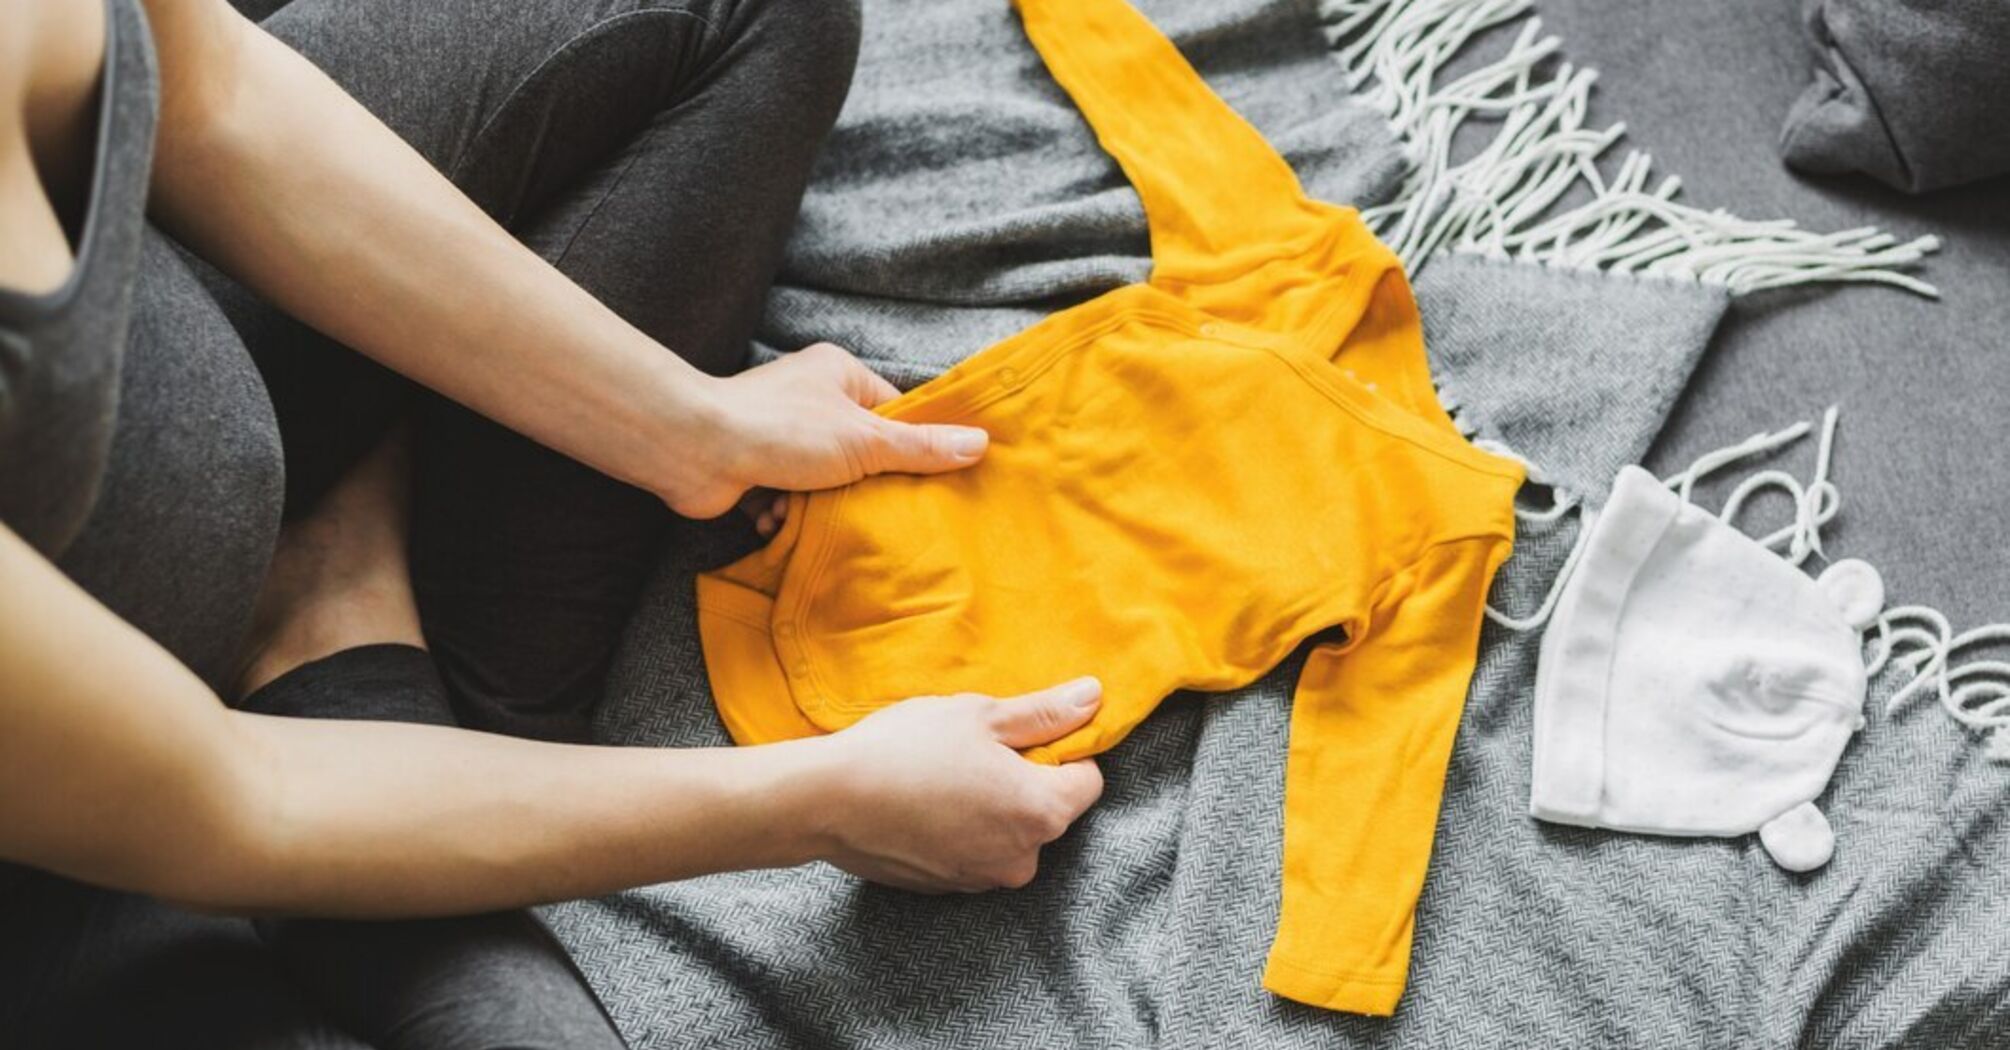 Methods of removing stains from children's clothing